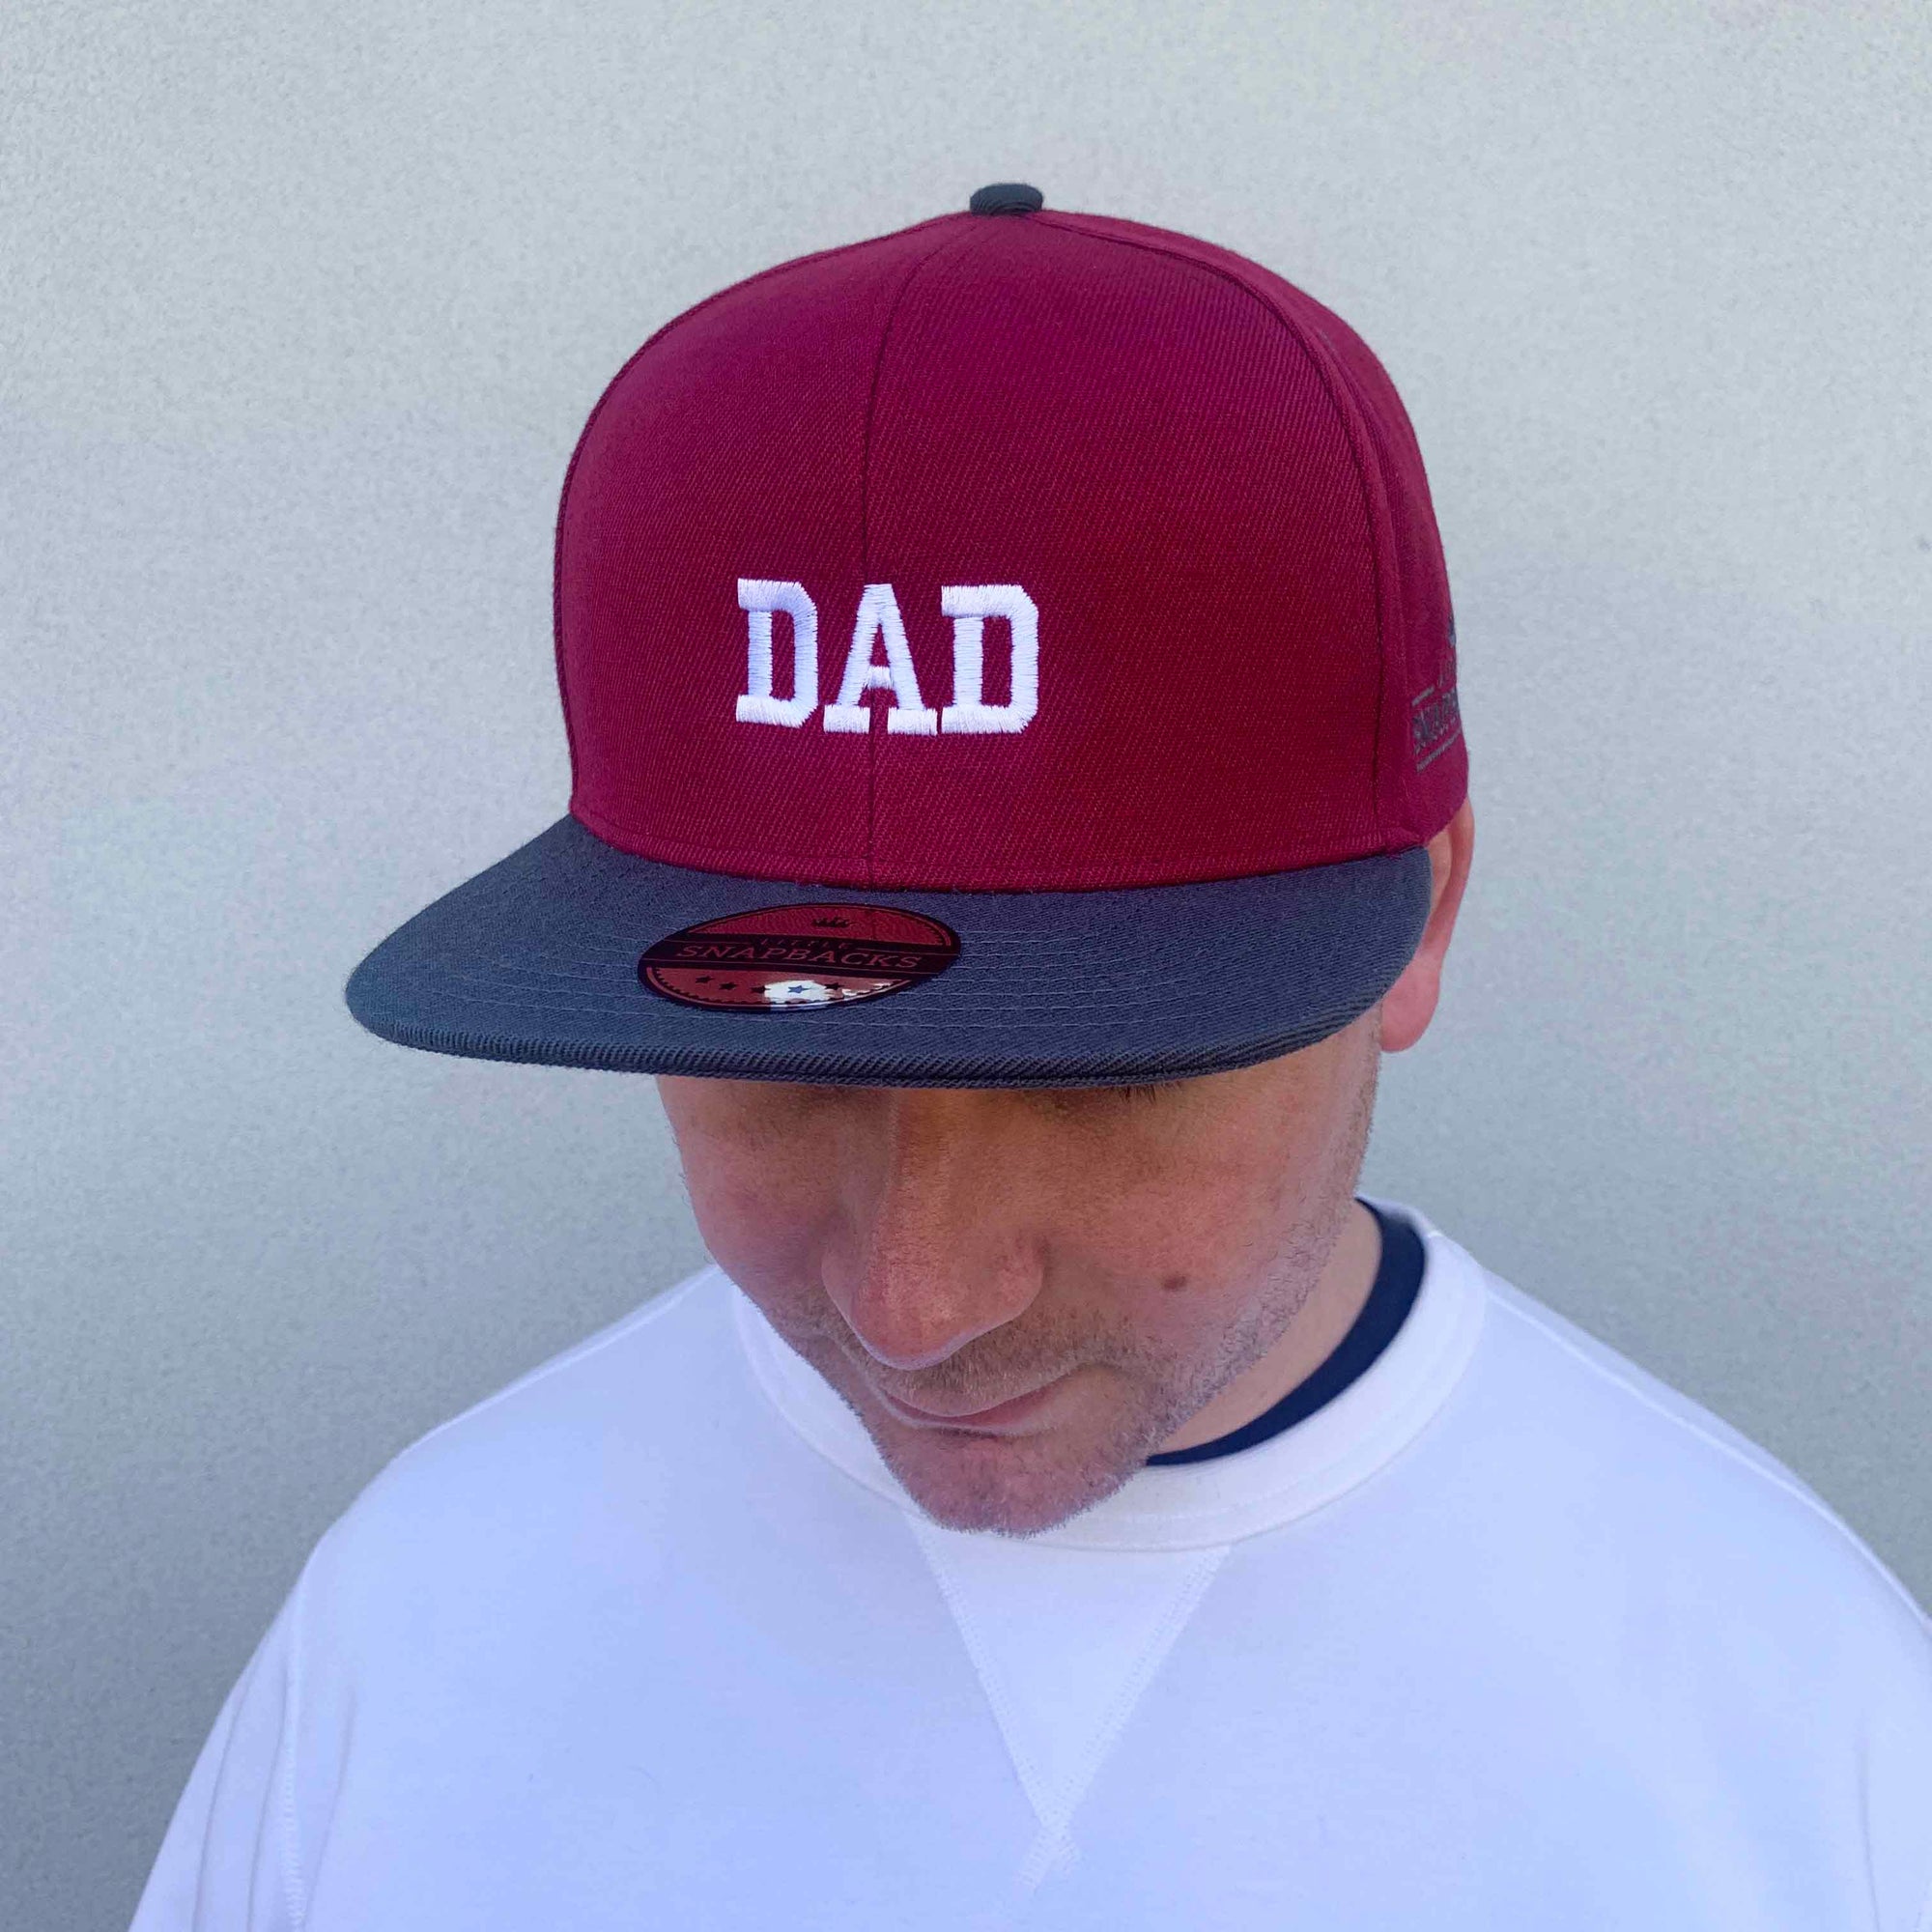 Matching Dad Hats - Fathers Day Gifts